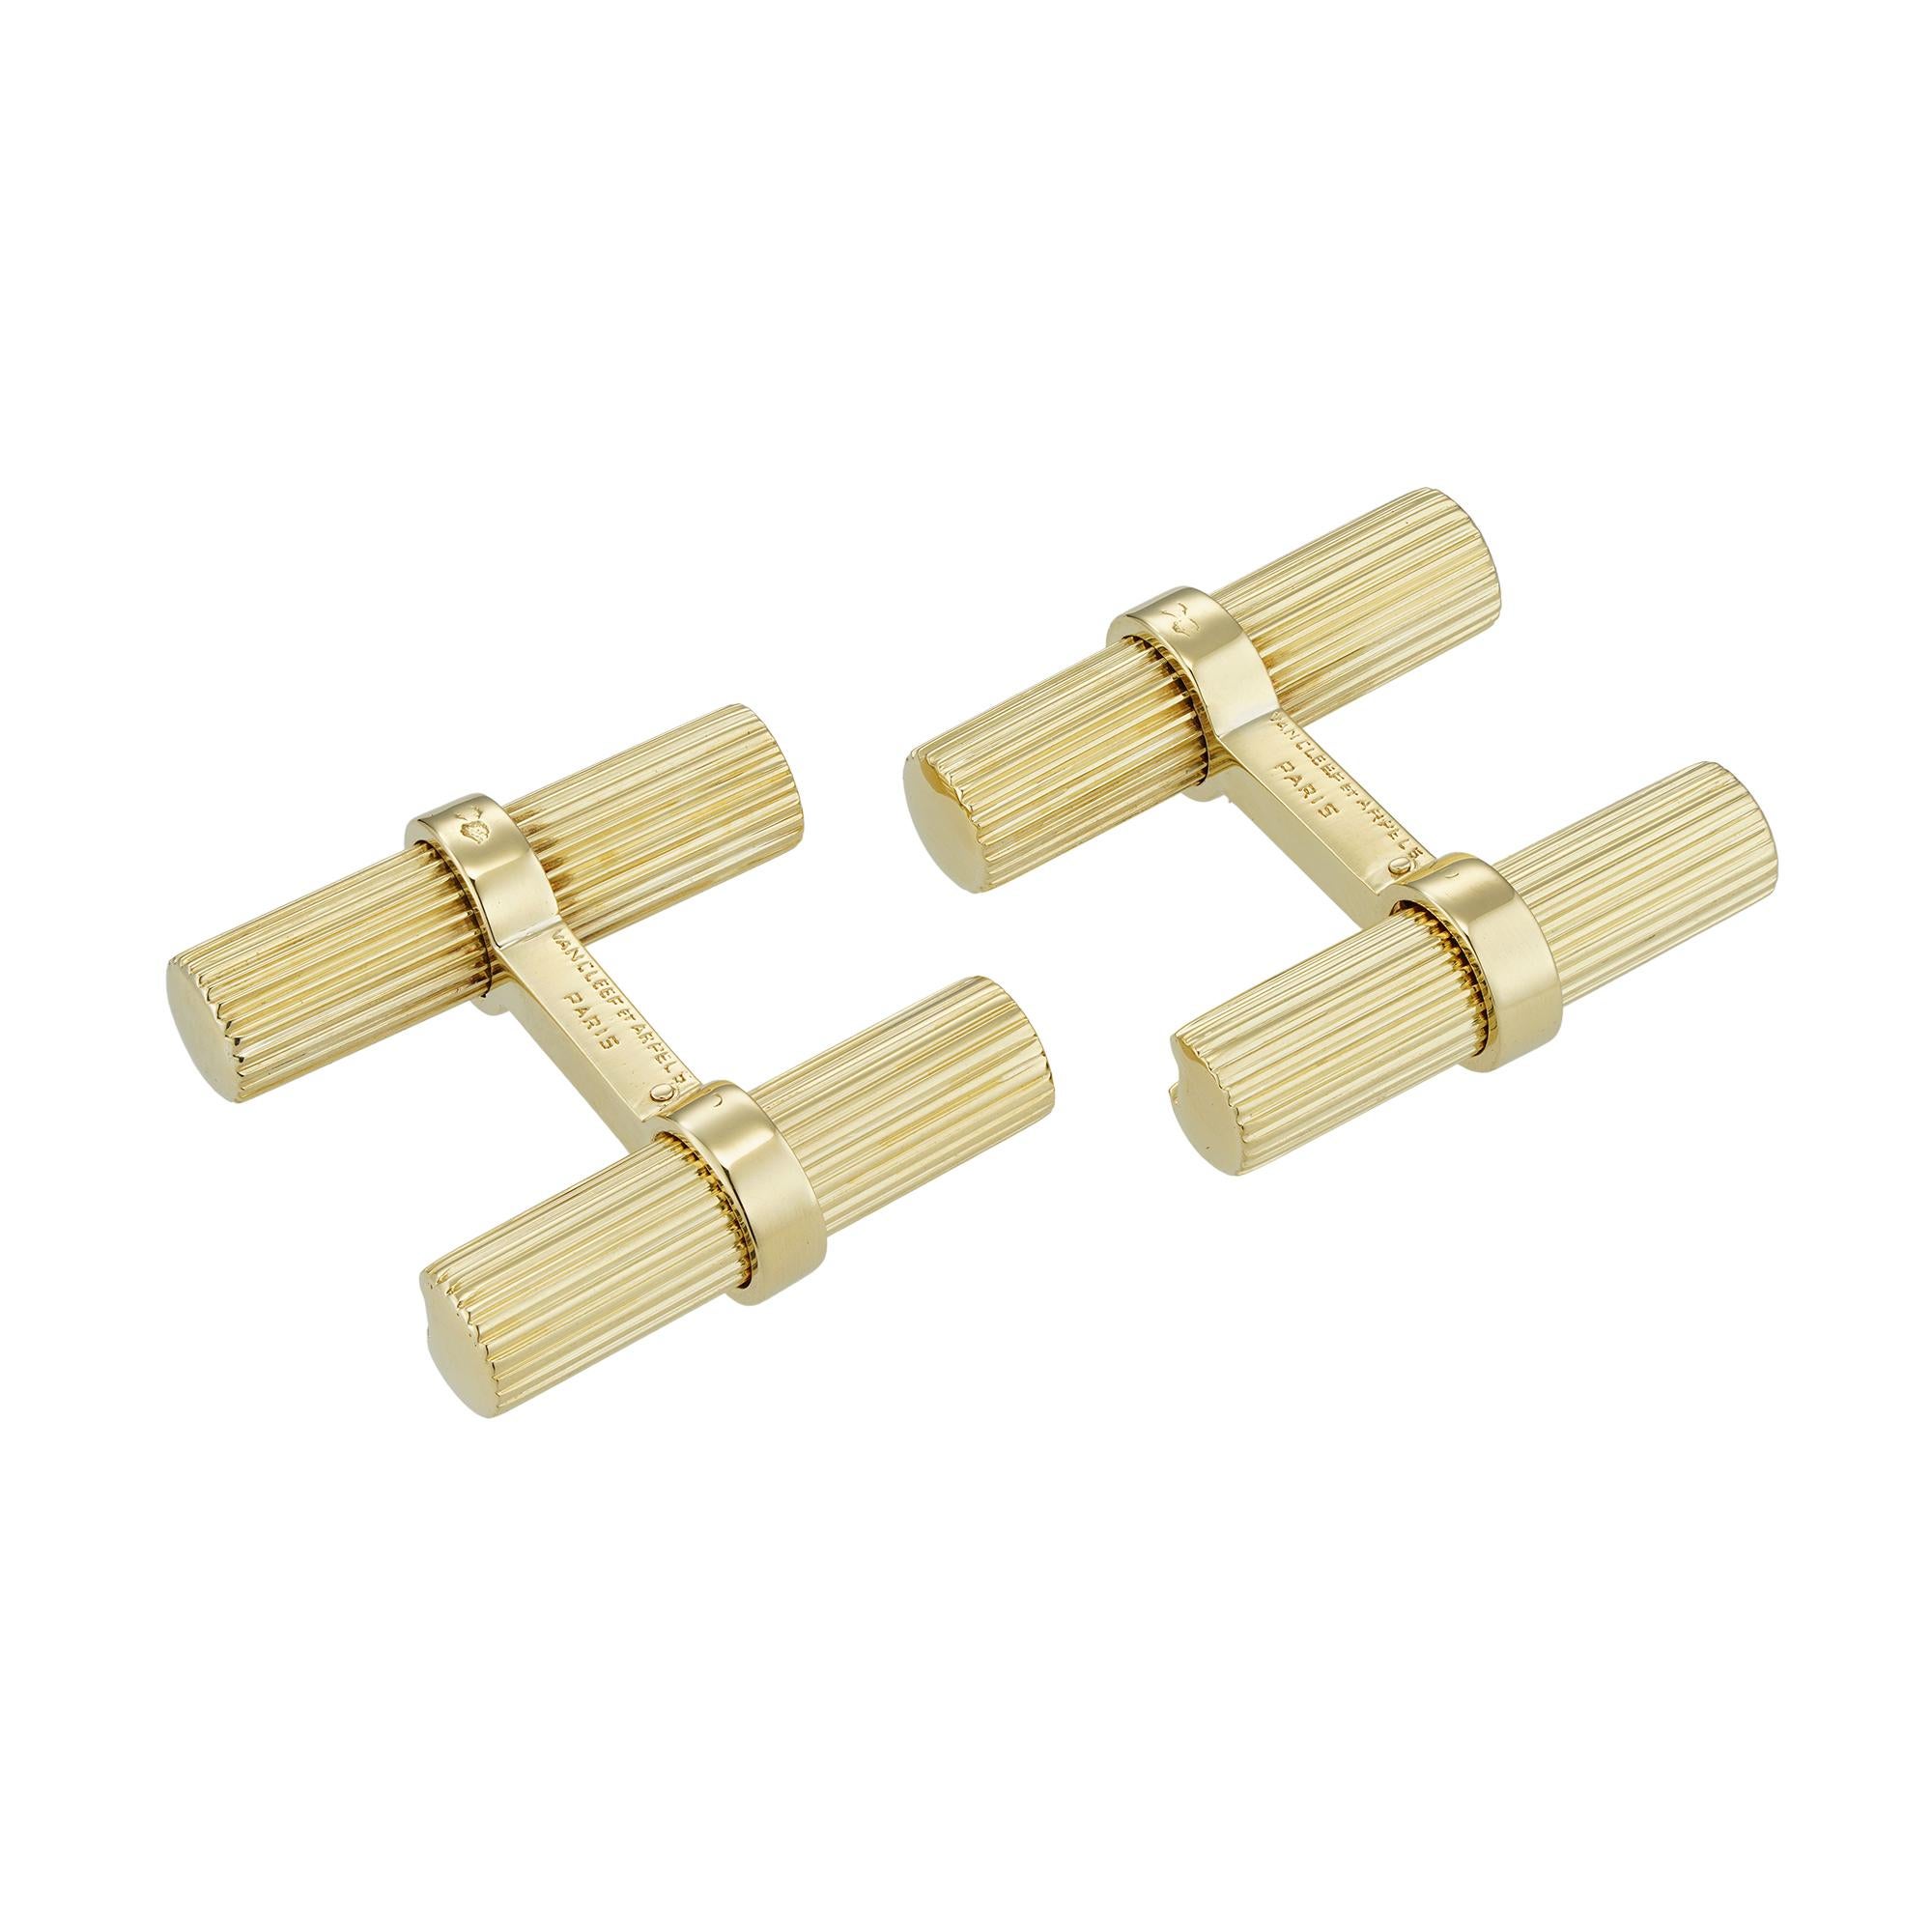 A pair of vintage VCA gold cufflinks, each cufflink consisted of two ridged  yellow gold batons, connected by bar, one of the batons with sliding mechanism, signed “Van Cleef et Arpels Paris”, inventory number 73693, bearing eagle head 18ct gold